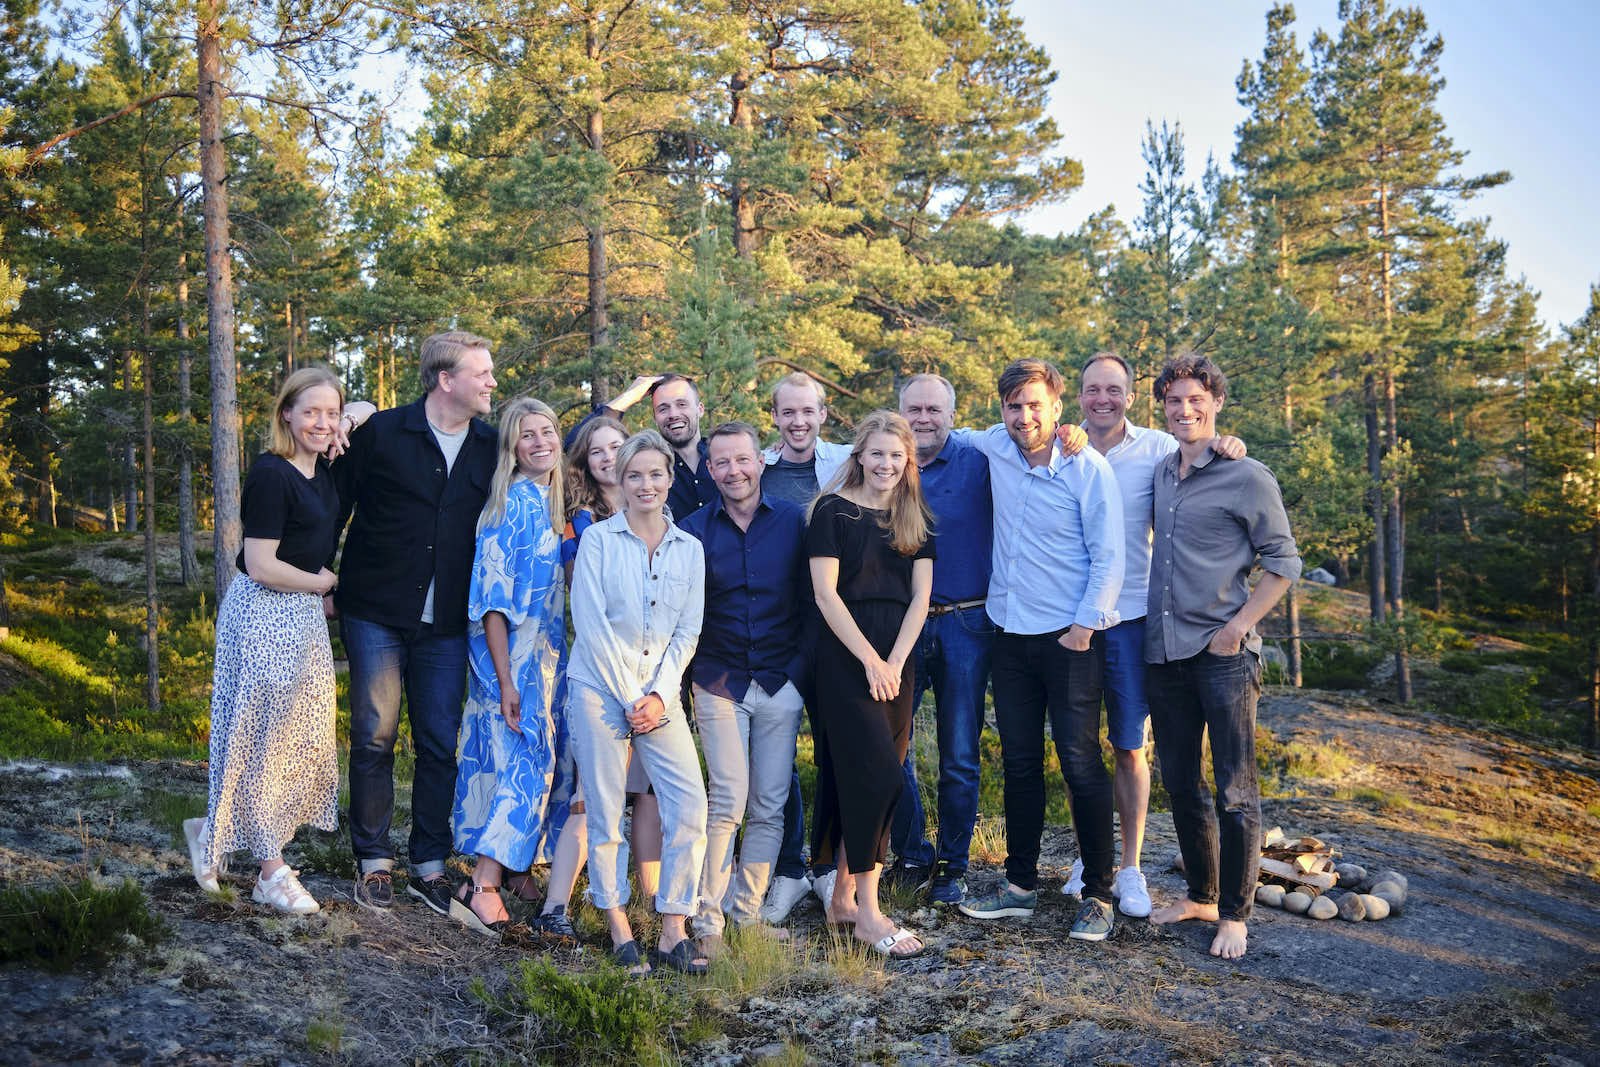 An image of the Iventure team, one of the top early-stage investors in the Nordics